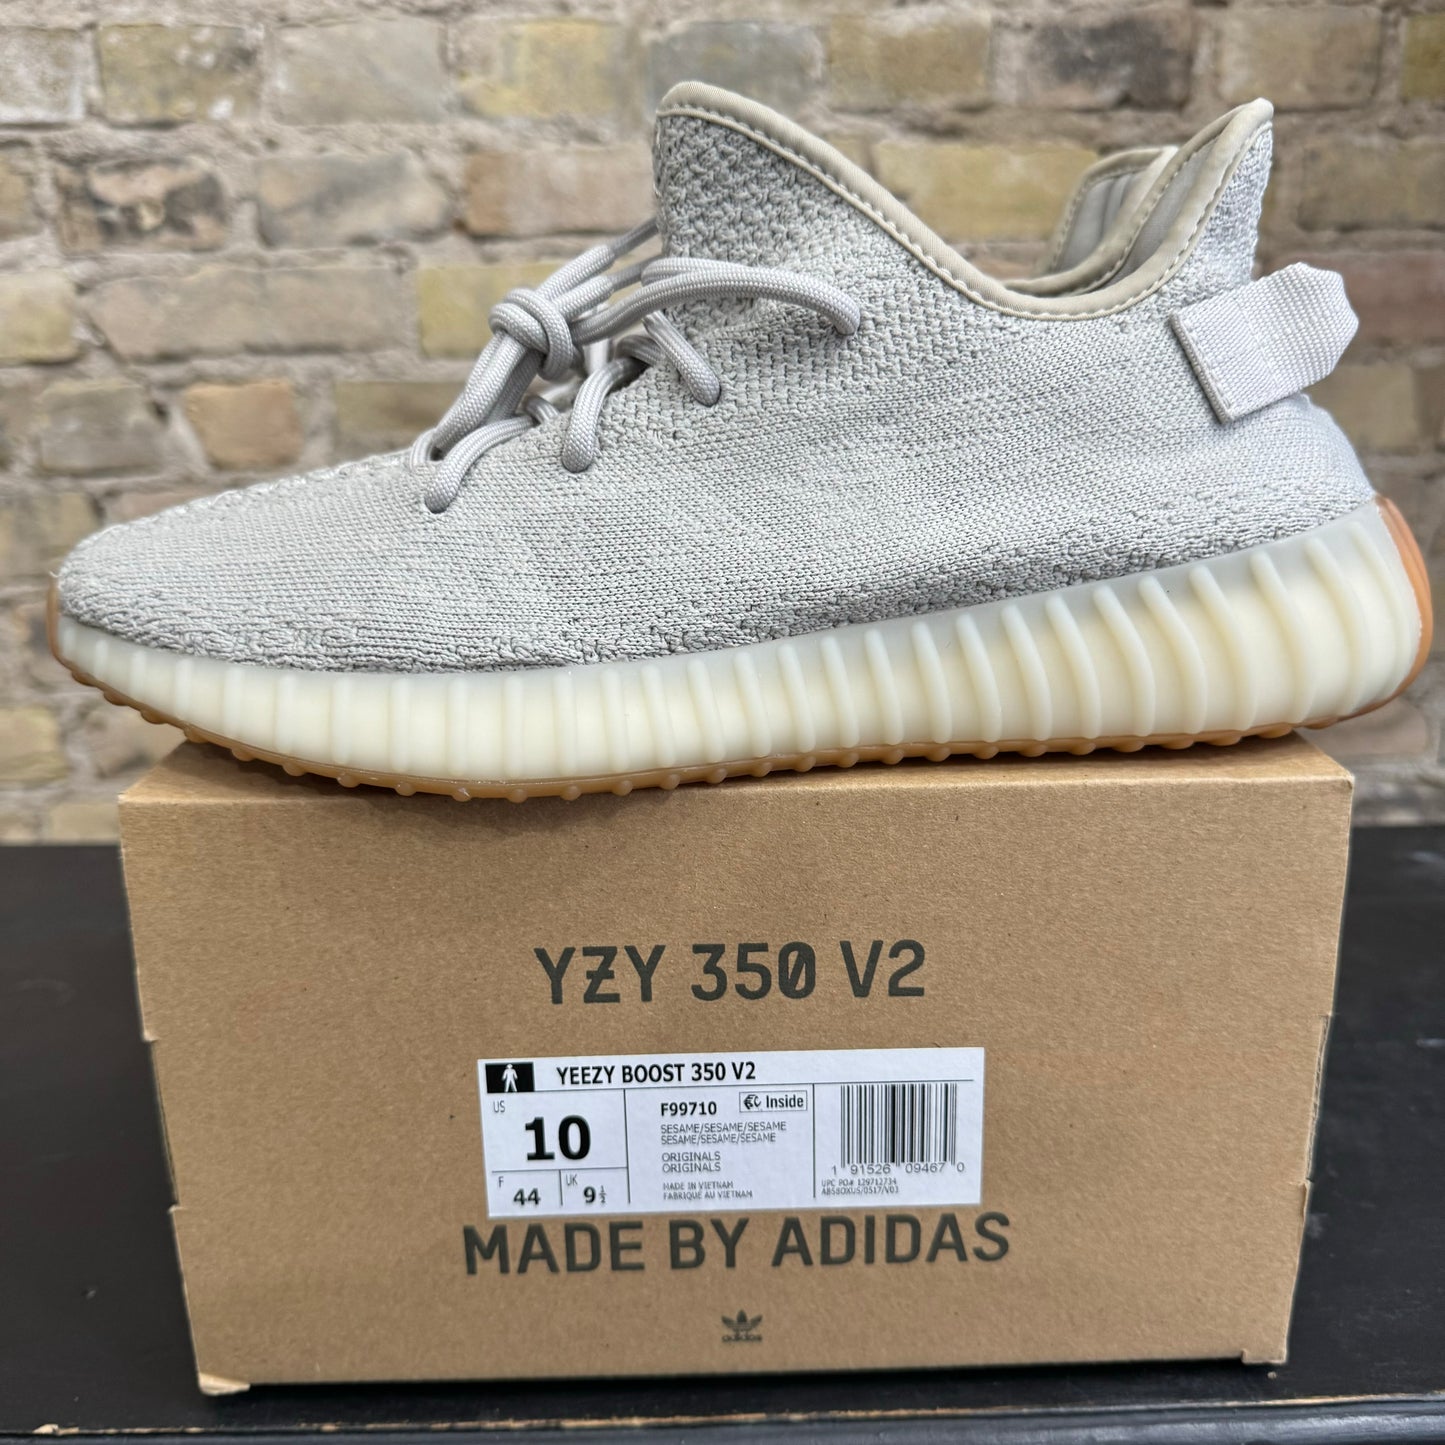 YZY 350 Sesame Size 10 (MKE) Trusted Club